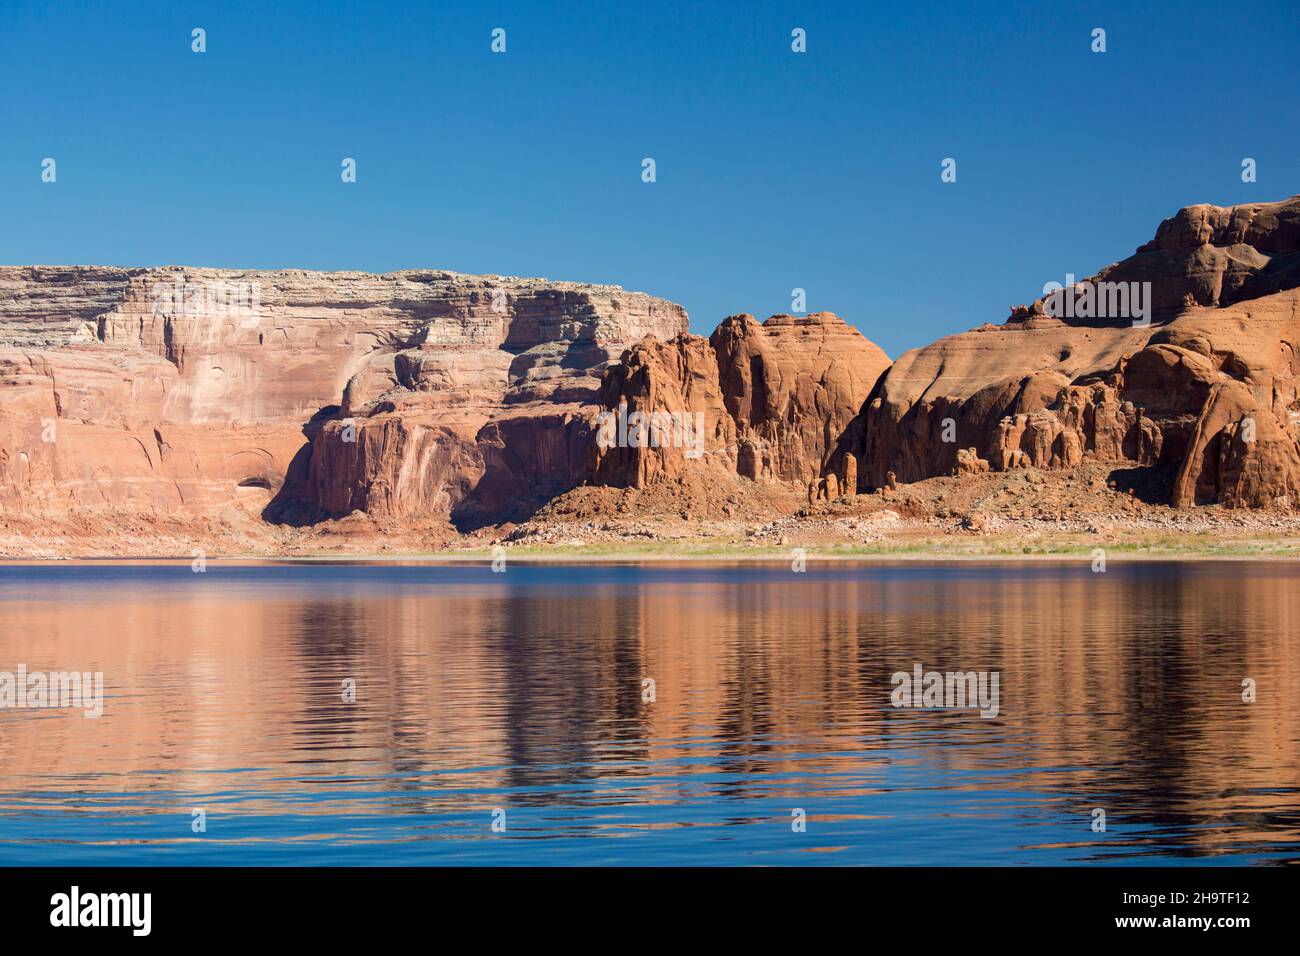 Glen Canyon National Recreation Area, Utah, USA. High red sandstone cliffs reflected in the tranquil waters of Lake Powell. Stock Photo